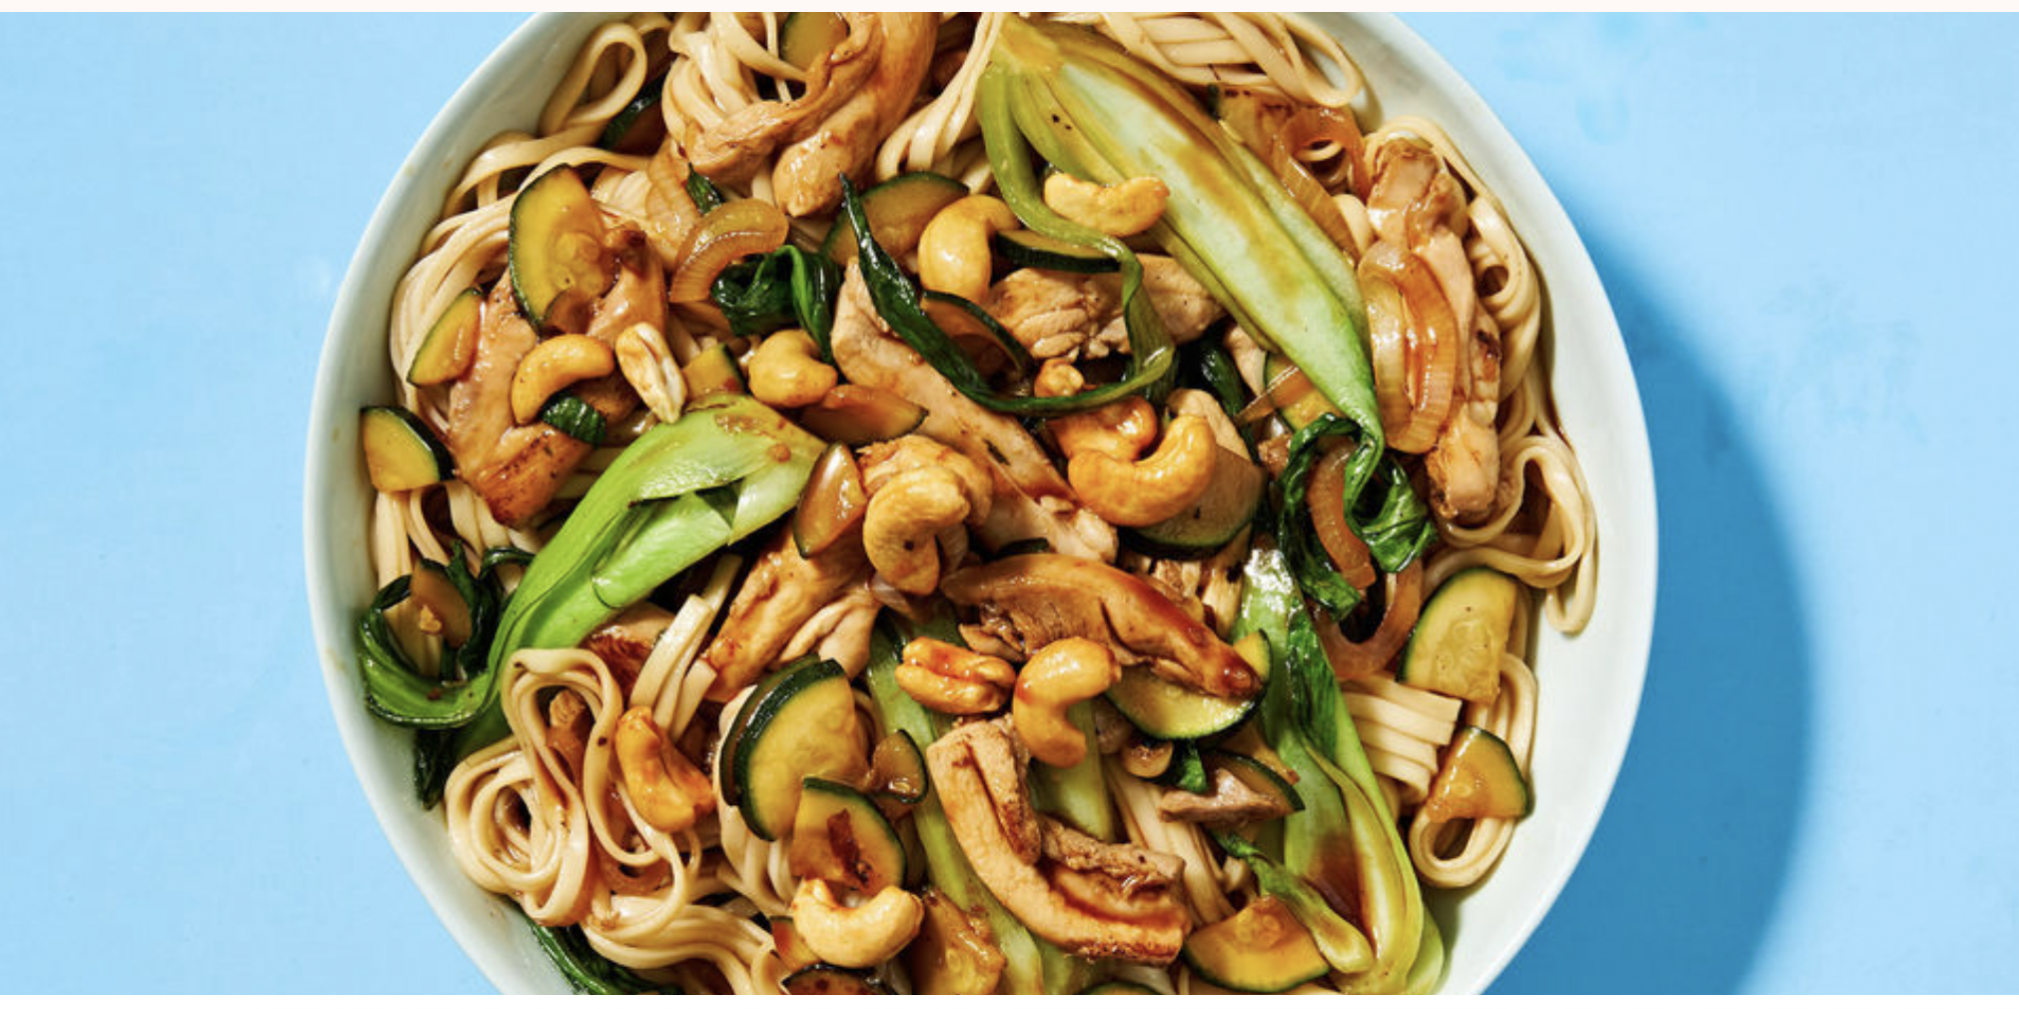 Chicken and Cashew Stir-Fry with Hokkien Noodles